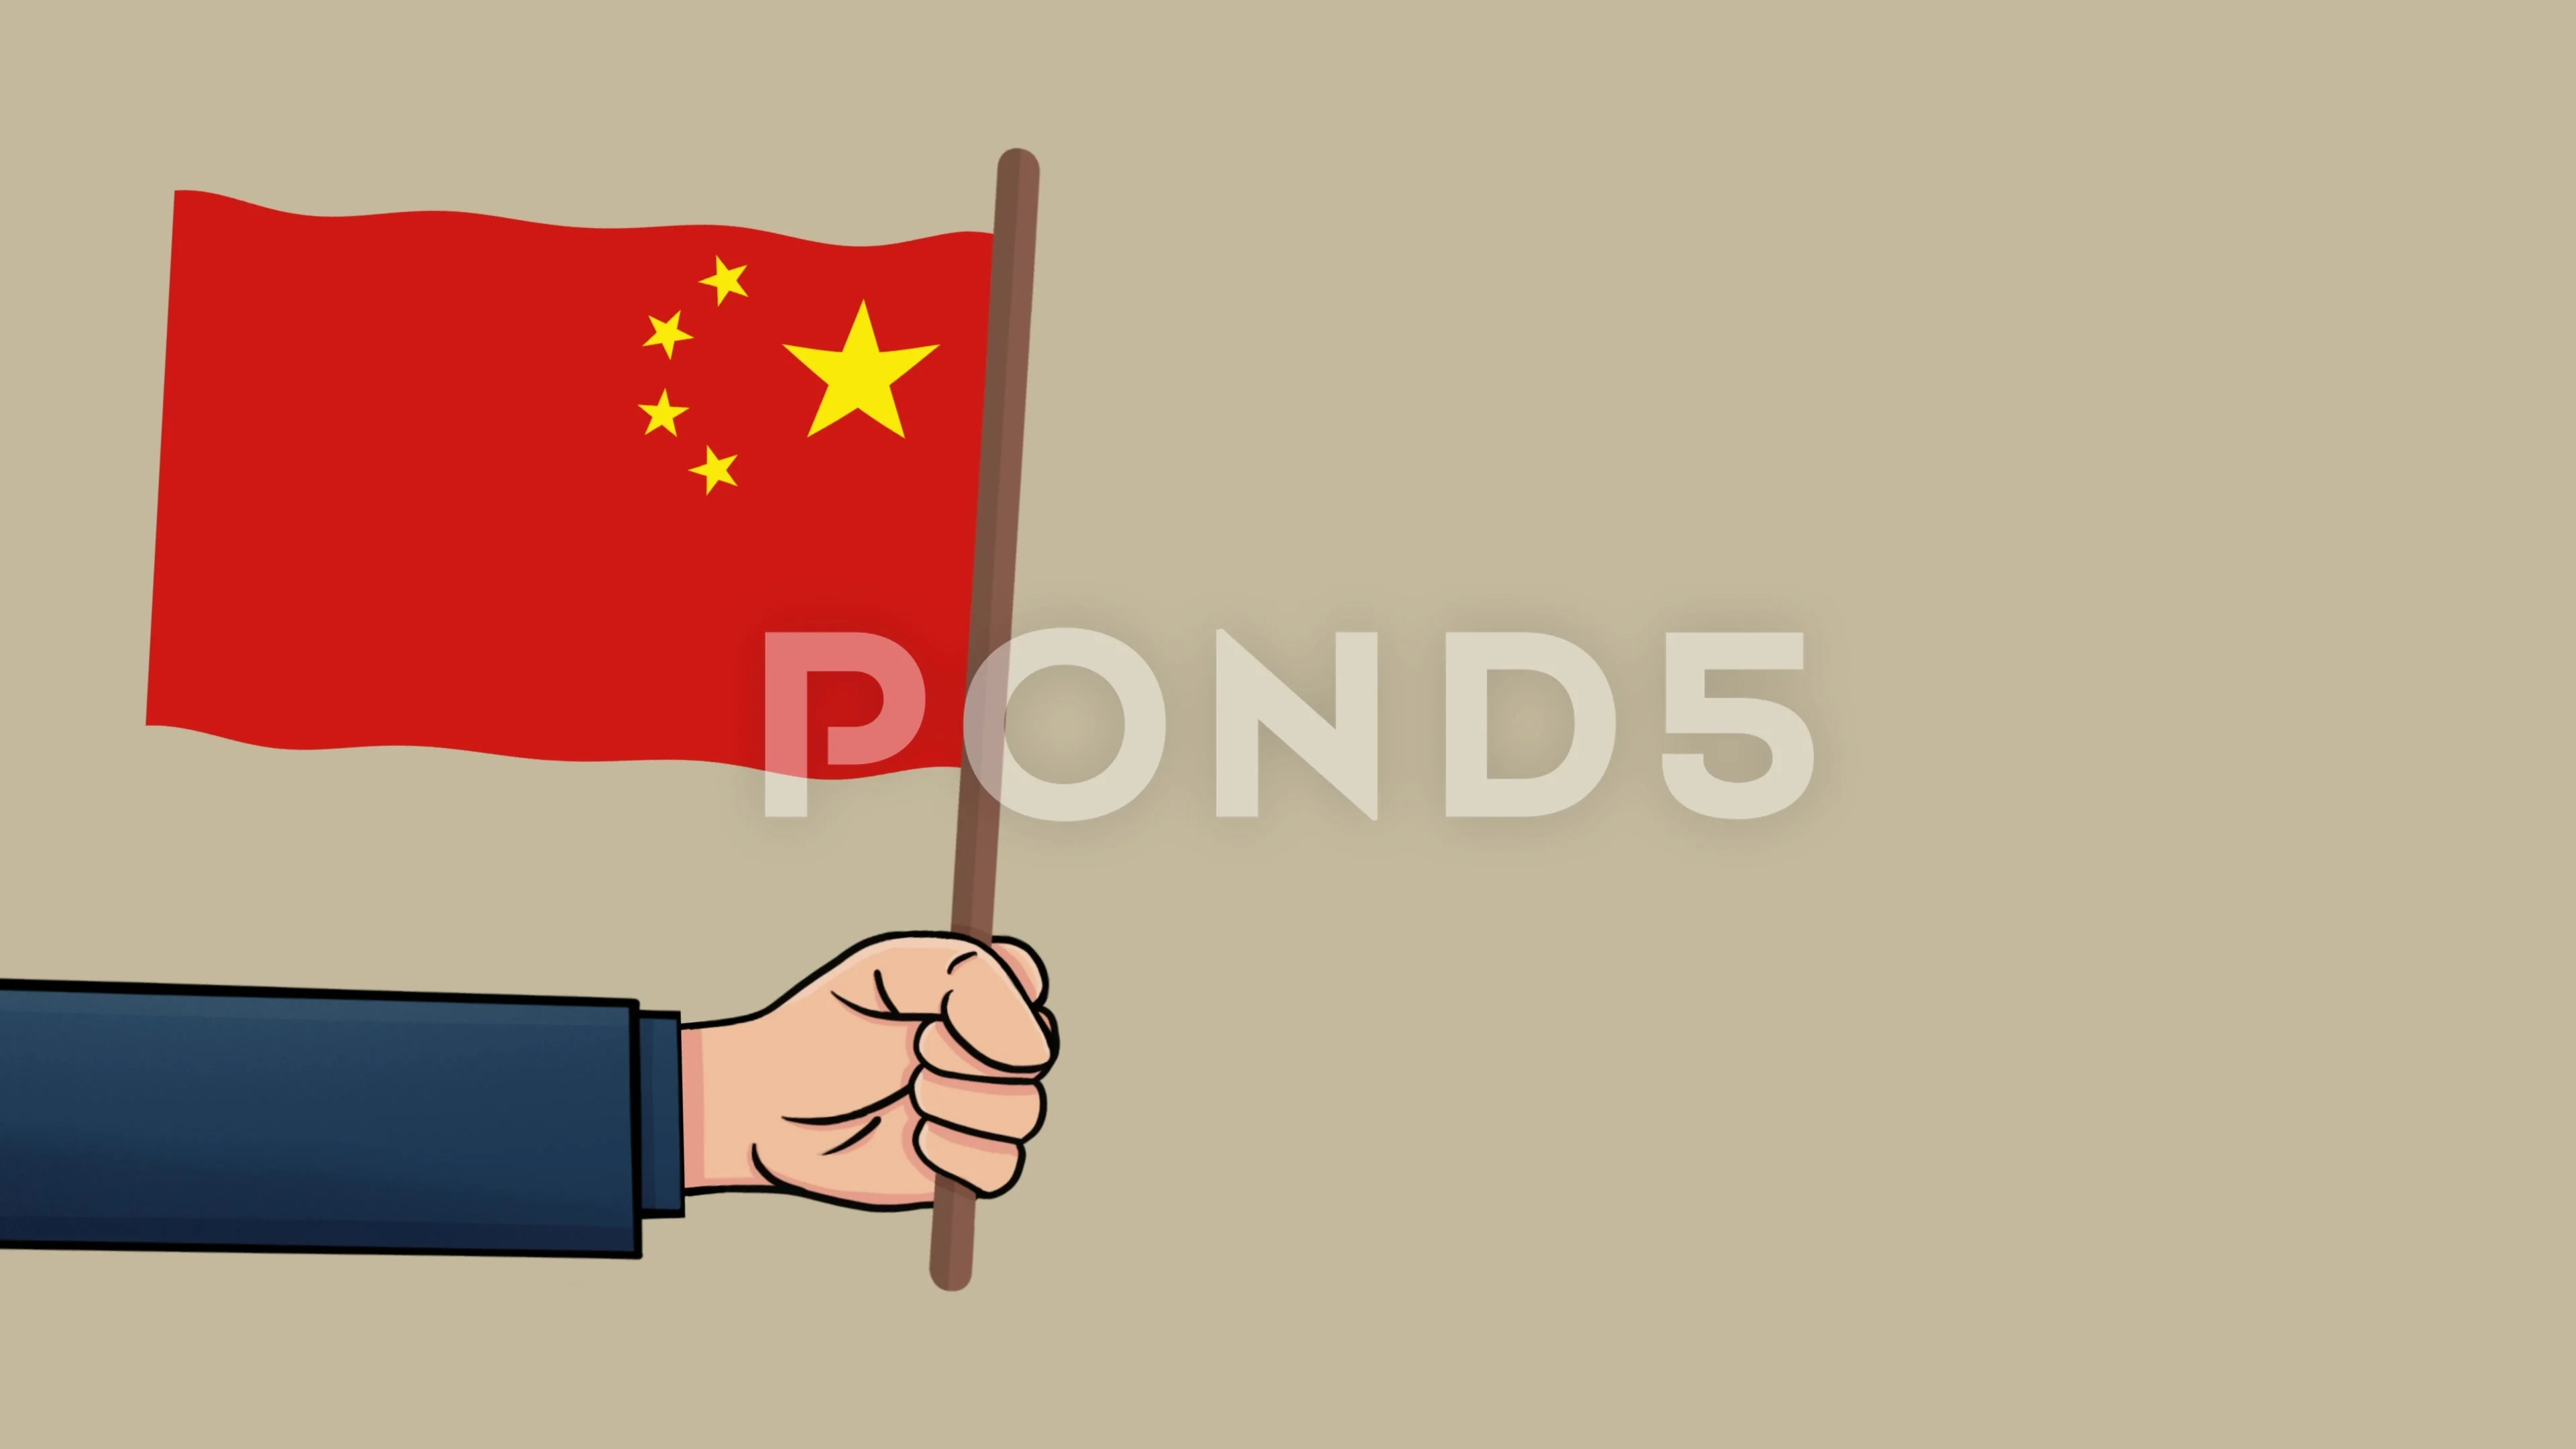 1,021 China Flag Grunge Style Royalty-Free Photos and Stock Images |  Shutterstock